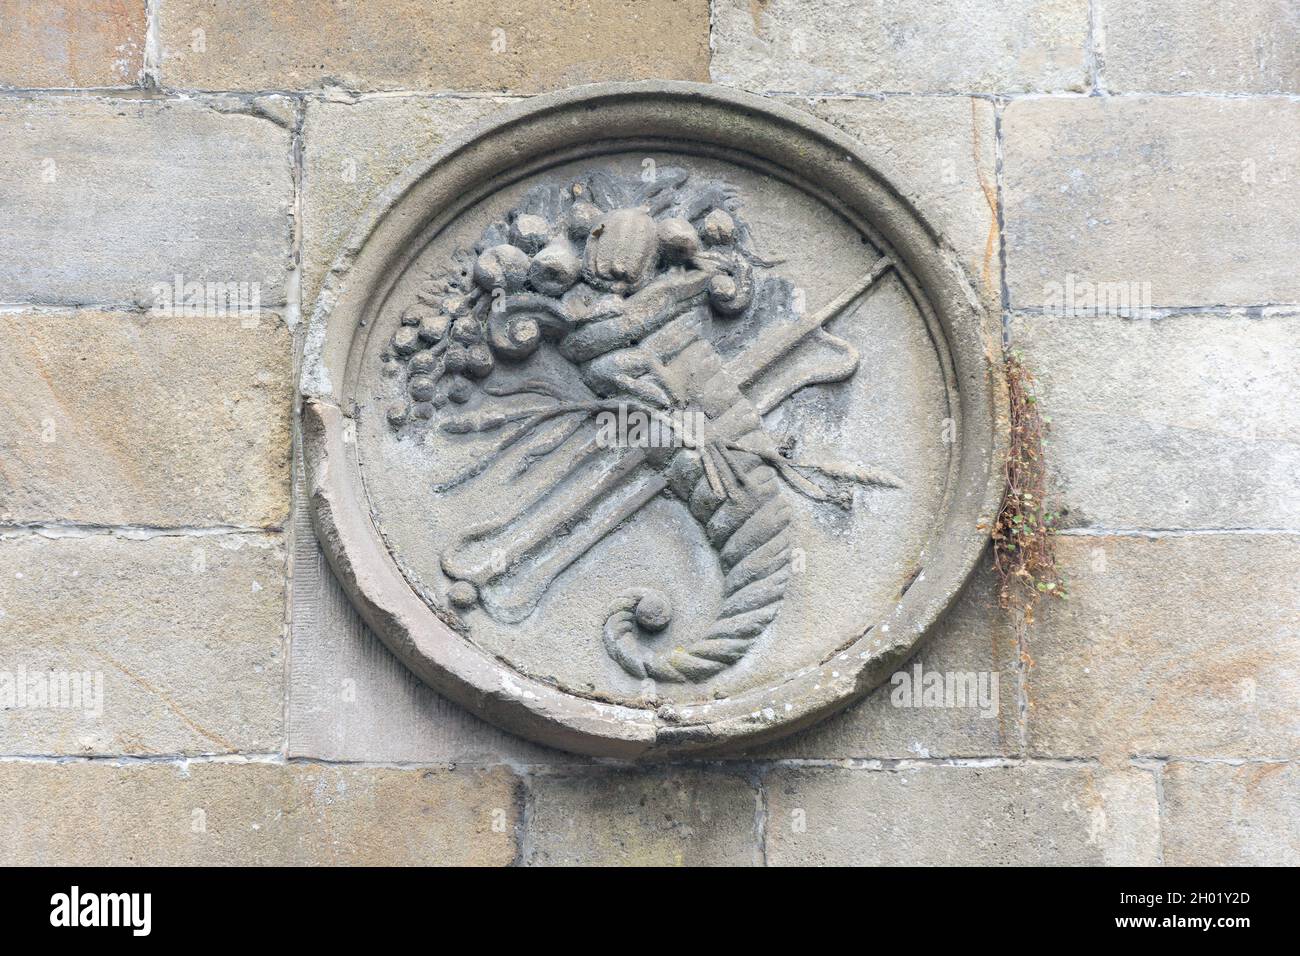 Cornucopia symbol carving on wall of Shipquay Gate, Derry (Londonderry), County Derry, Northern Ireland, United Kingdom Stock Photo